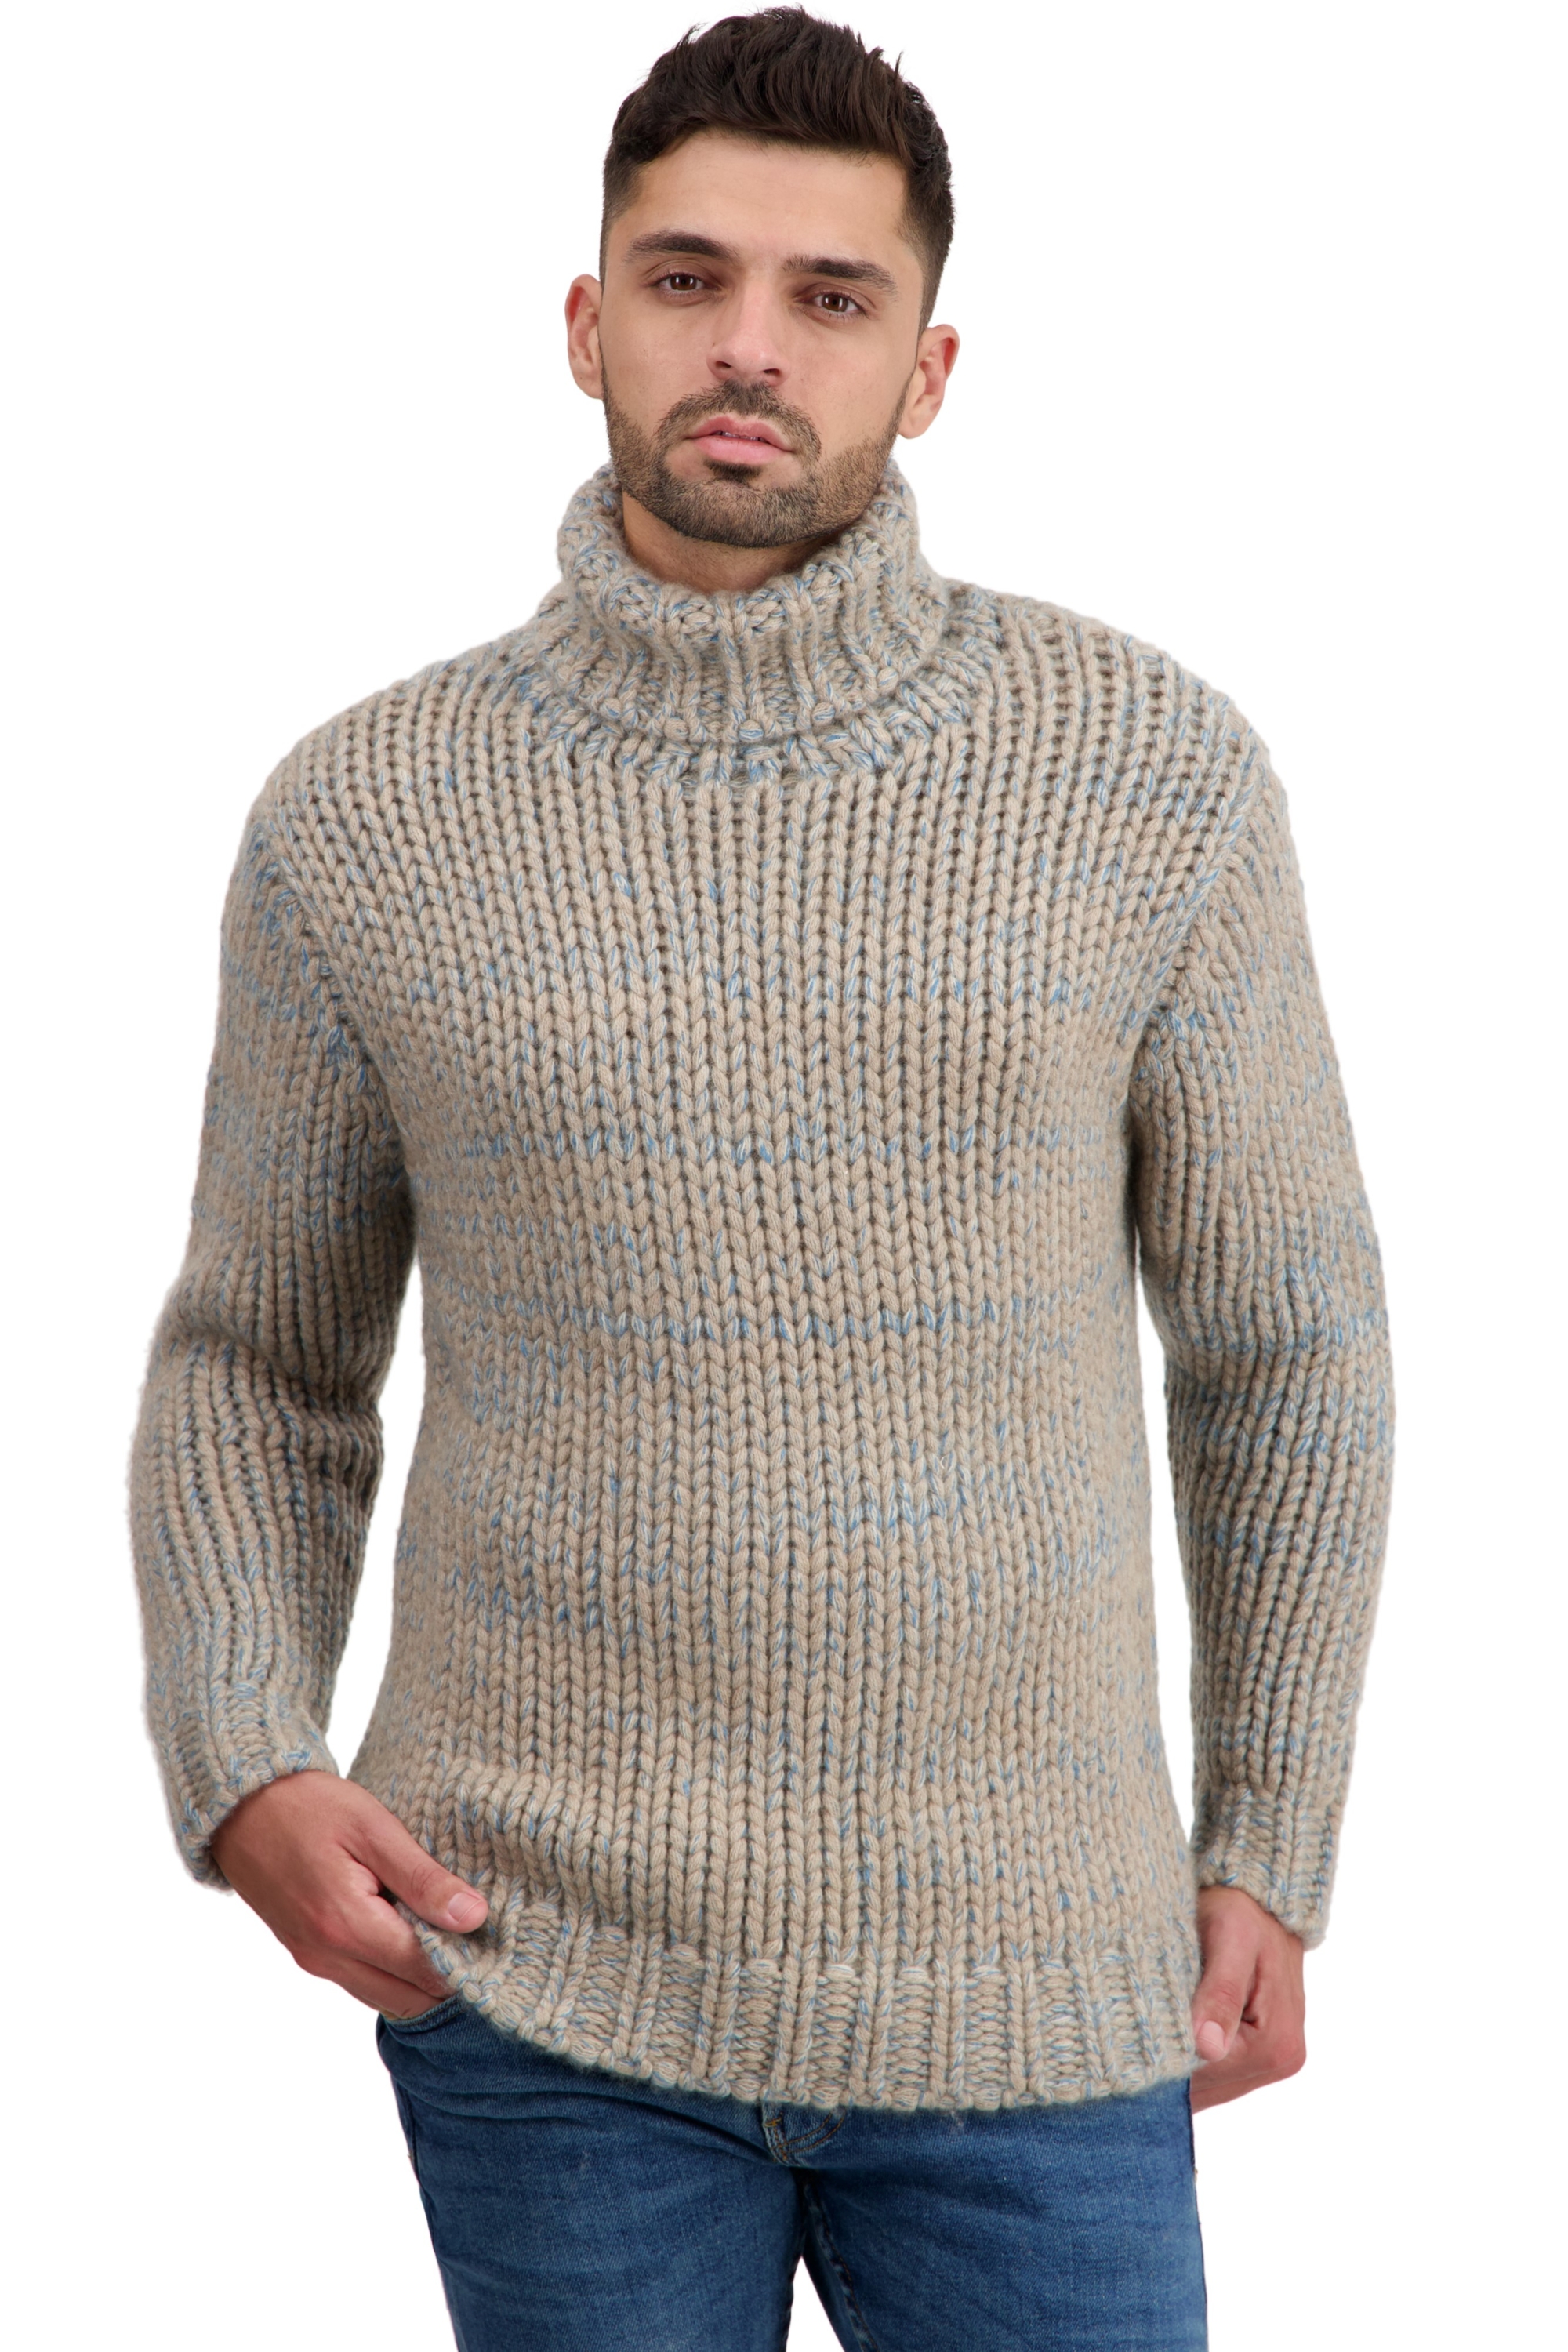 Cachemire pull homme col roule togo natural brown manor blue natural beige 4xl